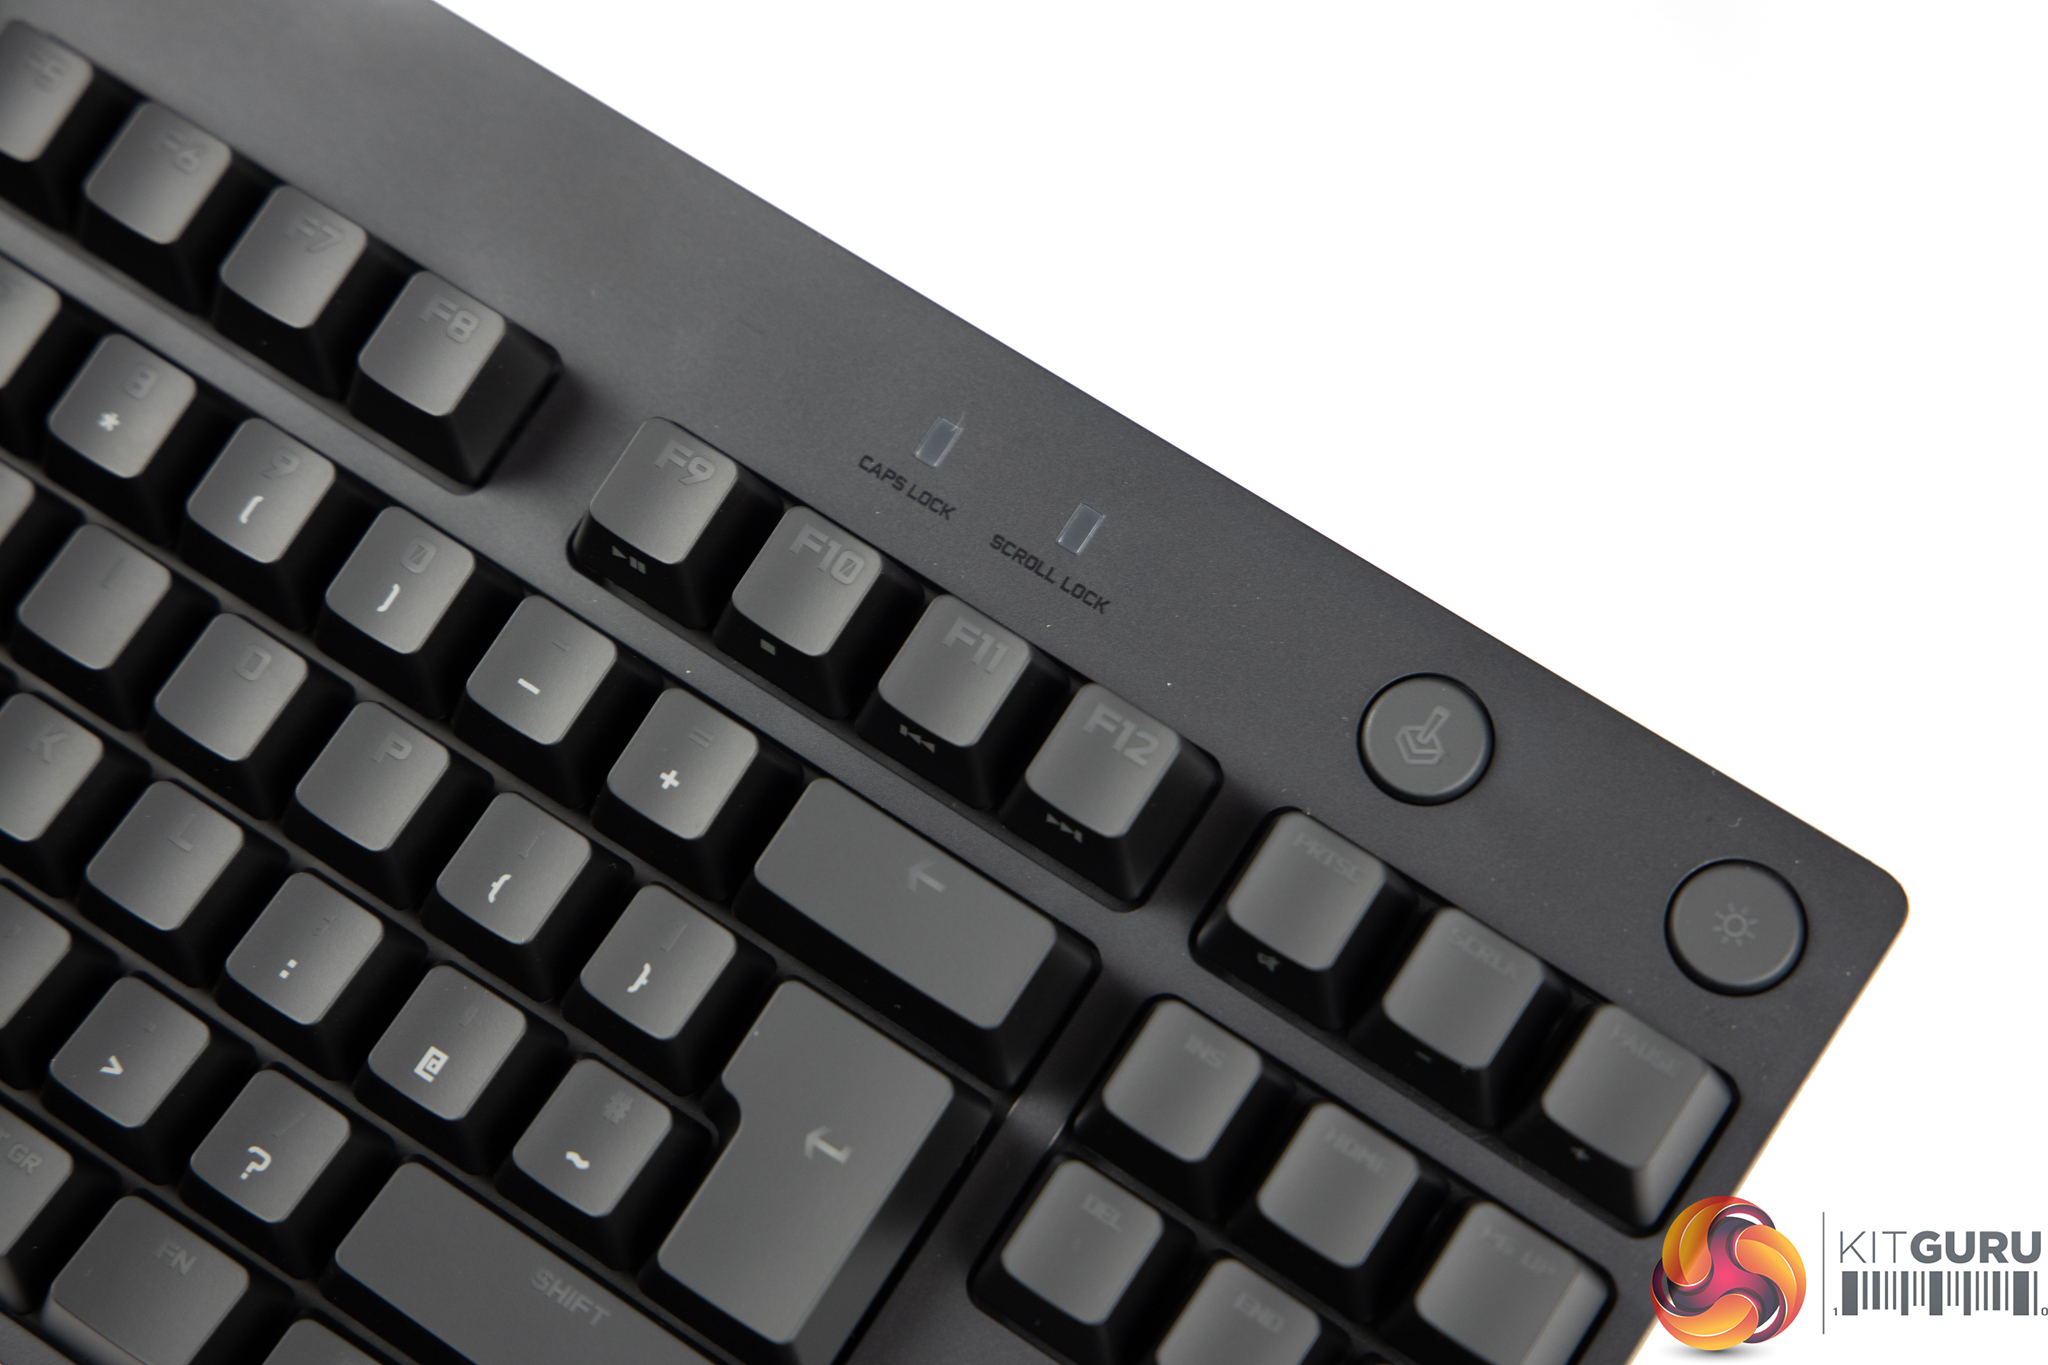 Logitech G Pro Keyboard Review! Why Are Pros Using This Keyboard? 